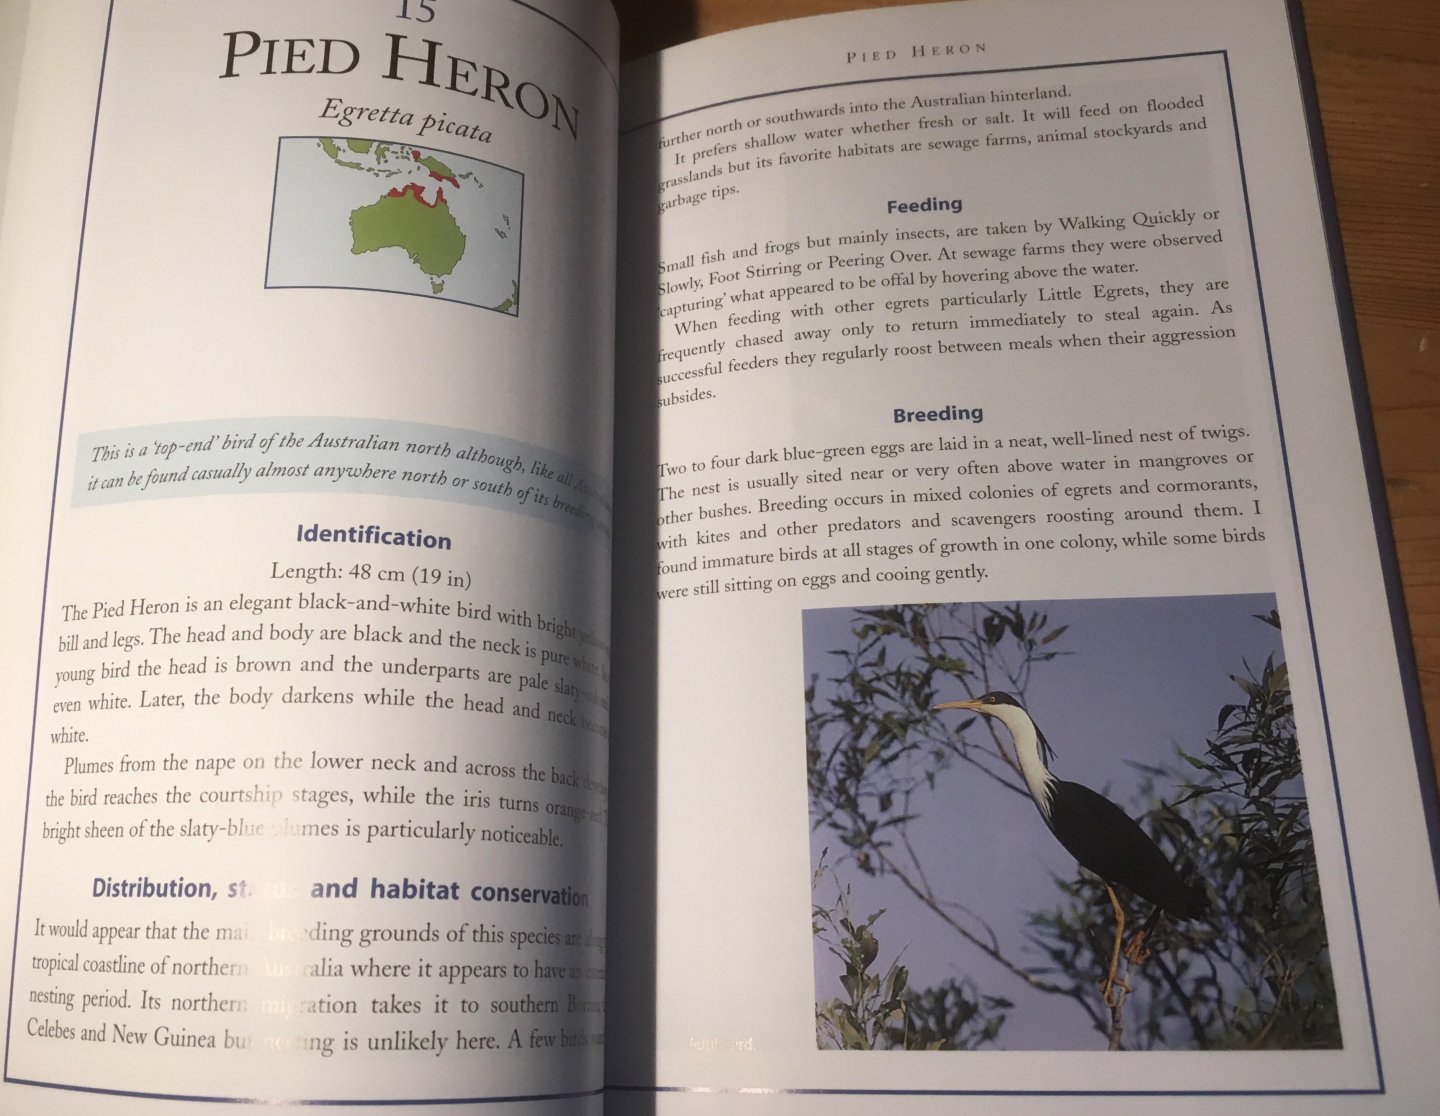 Hancock, James - Herons & Egrets of the World - a photographic journey